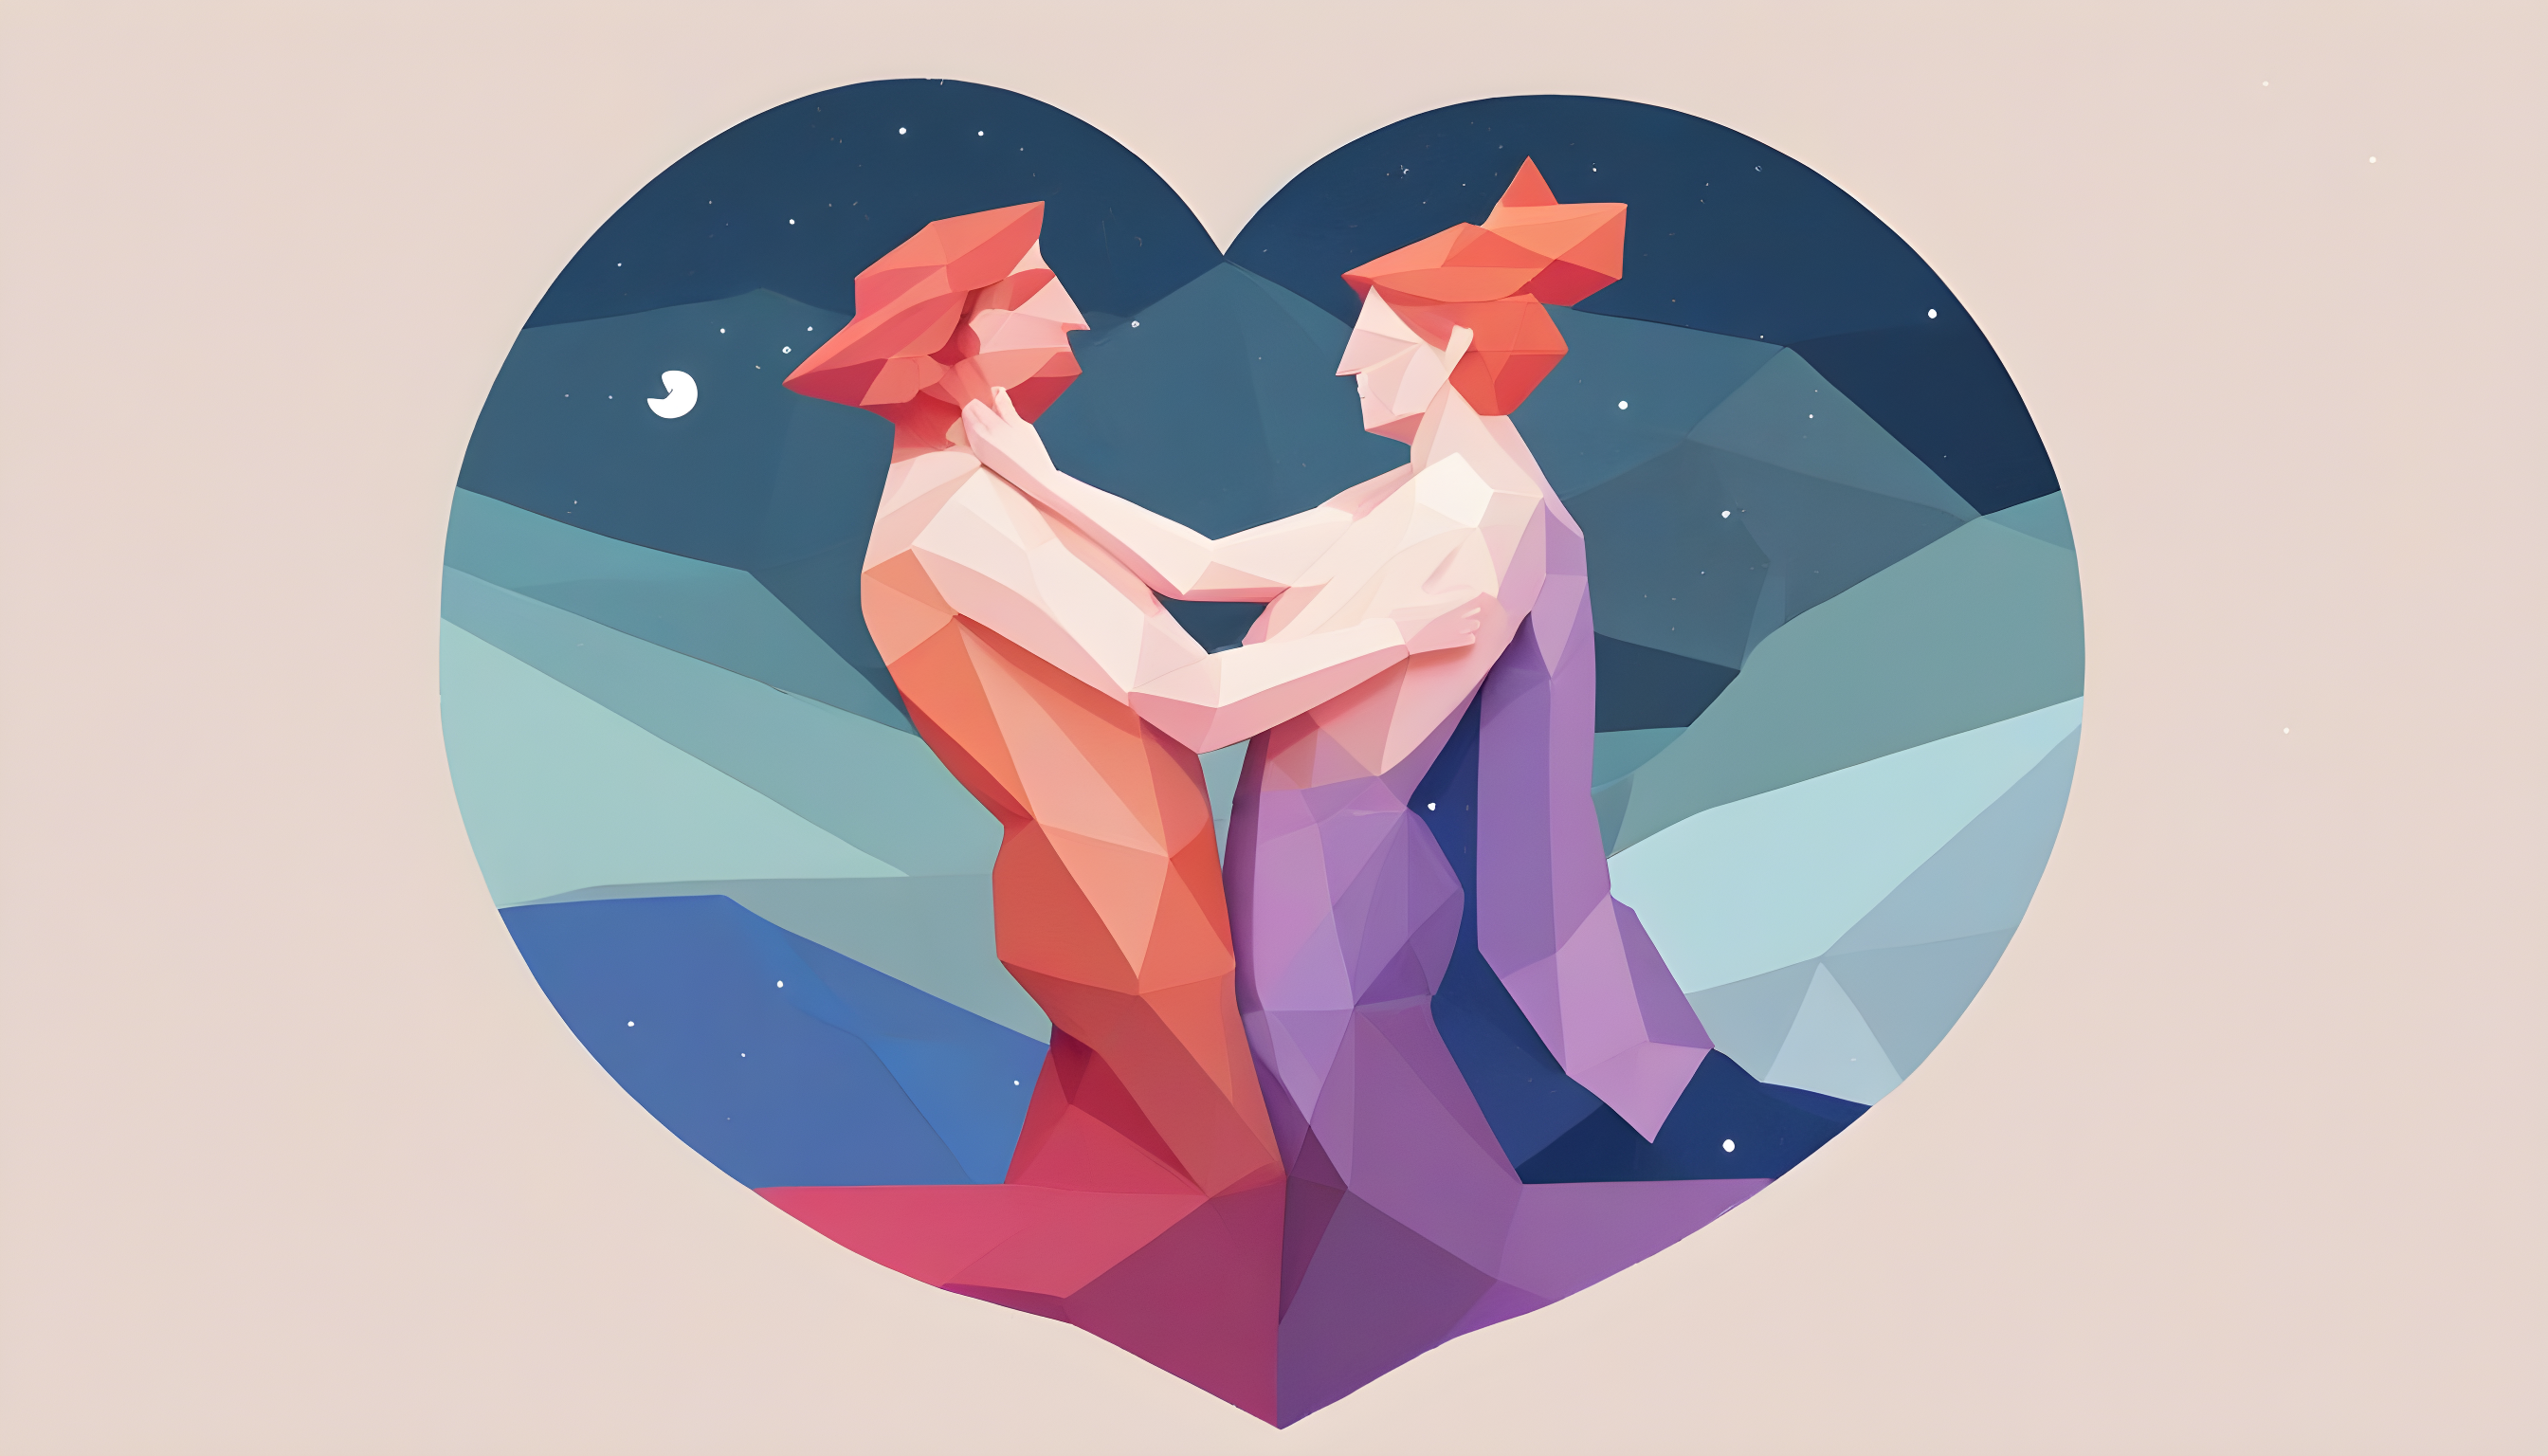 Soulmates – the deepest human connection!